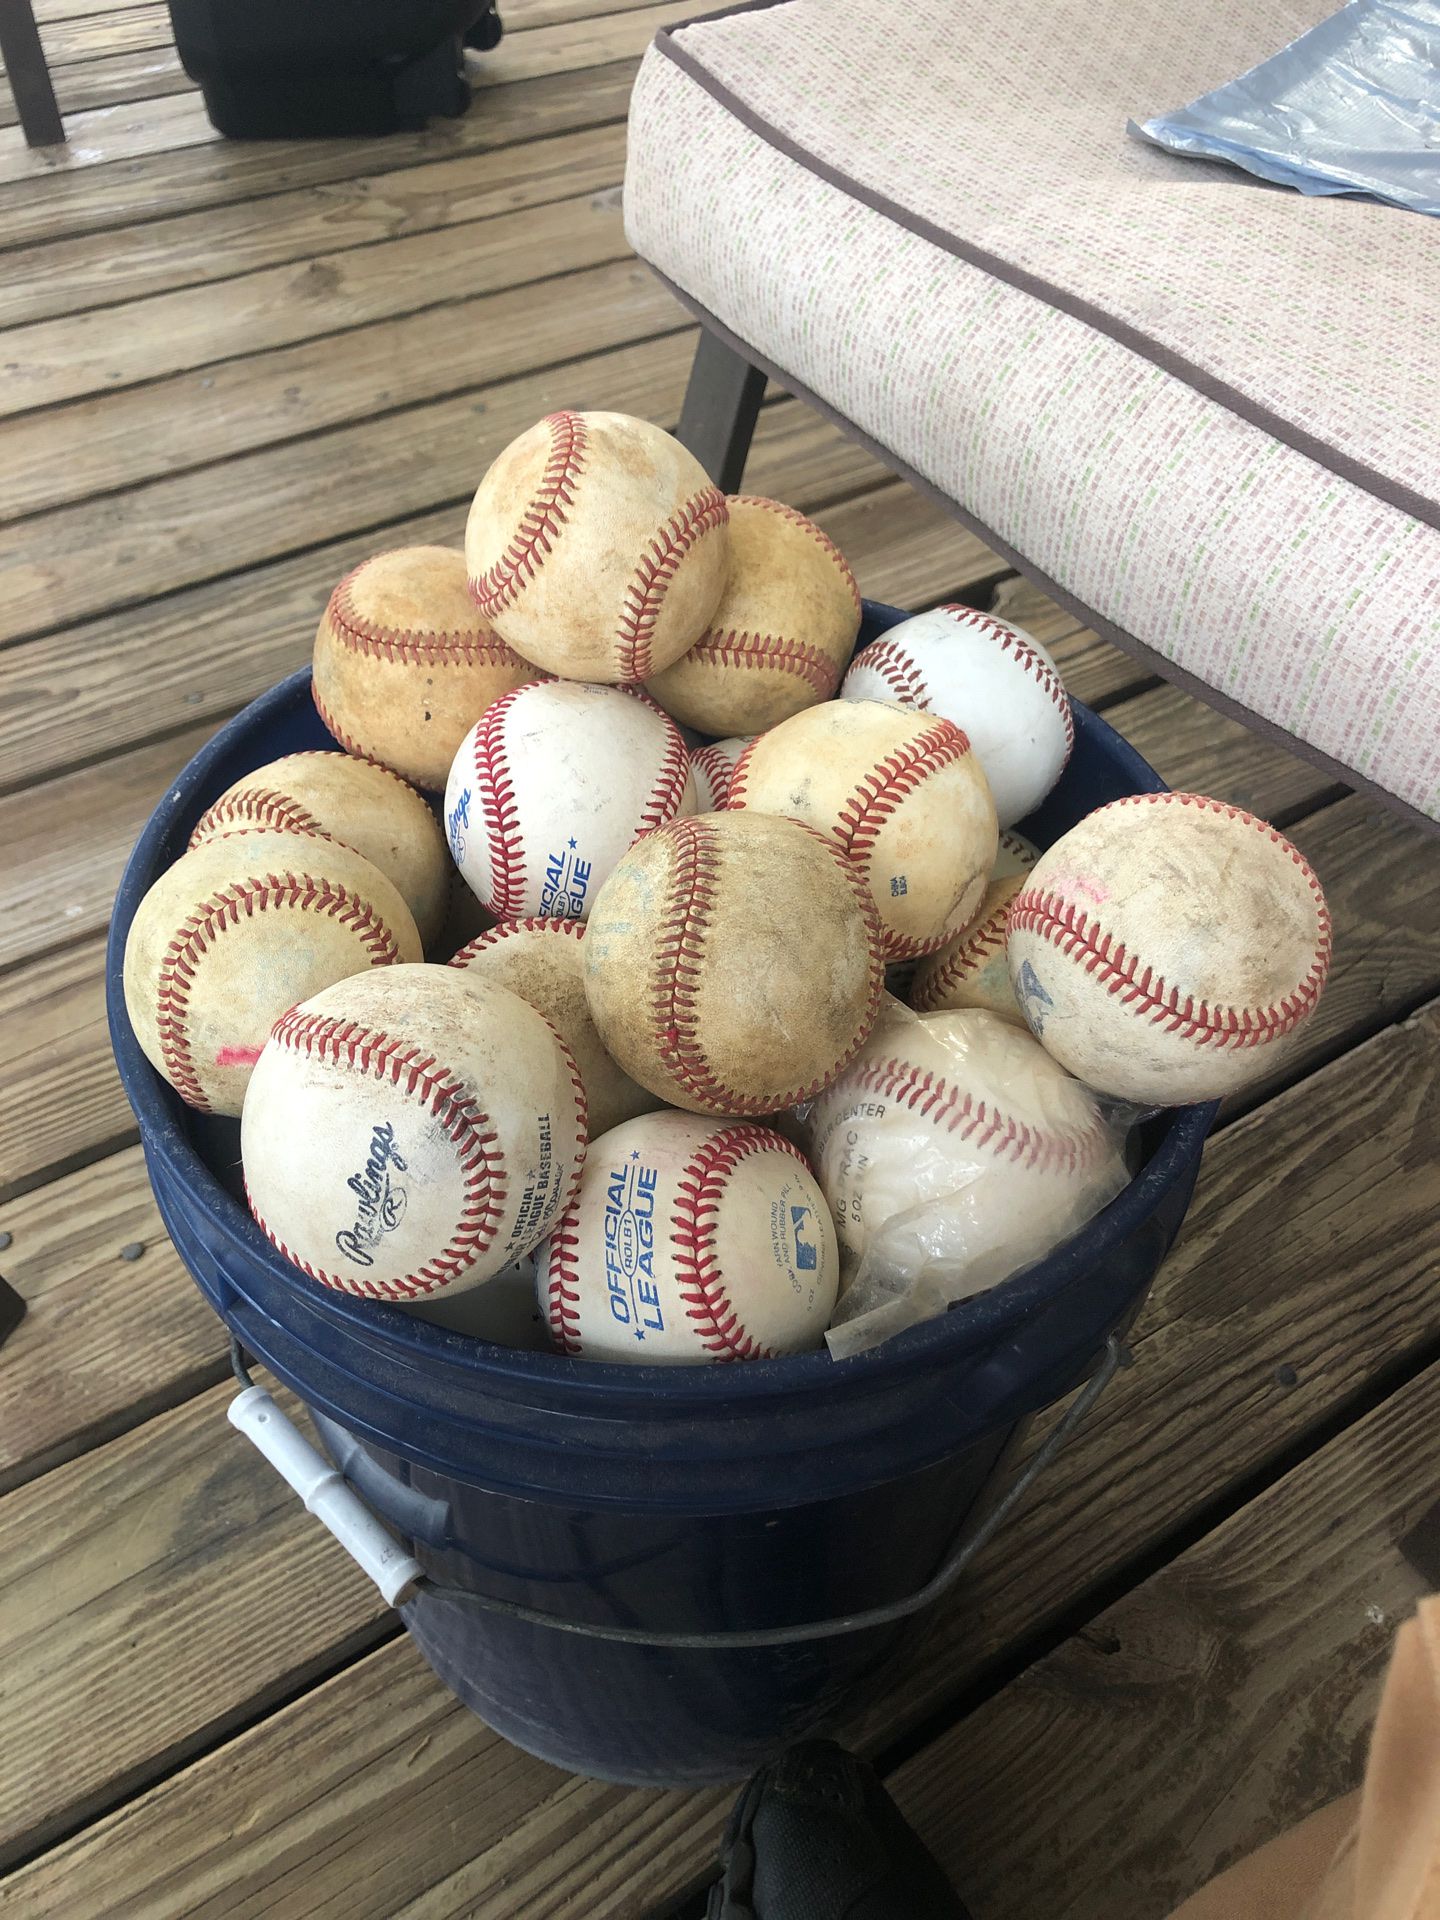 Baseballs bucket for practice sport batting ( IF STILL UP, IS AVAILABLE)